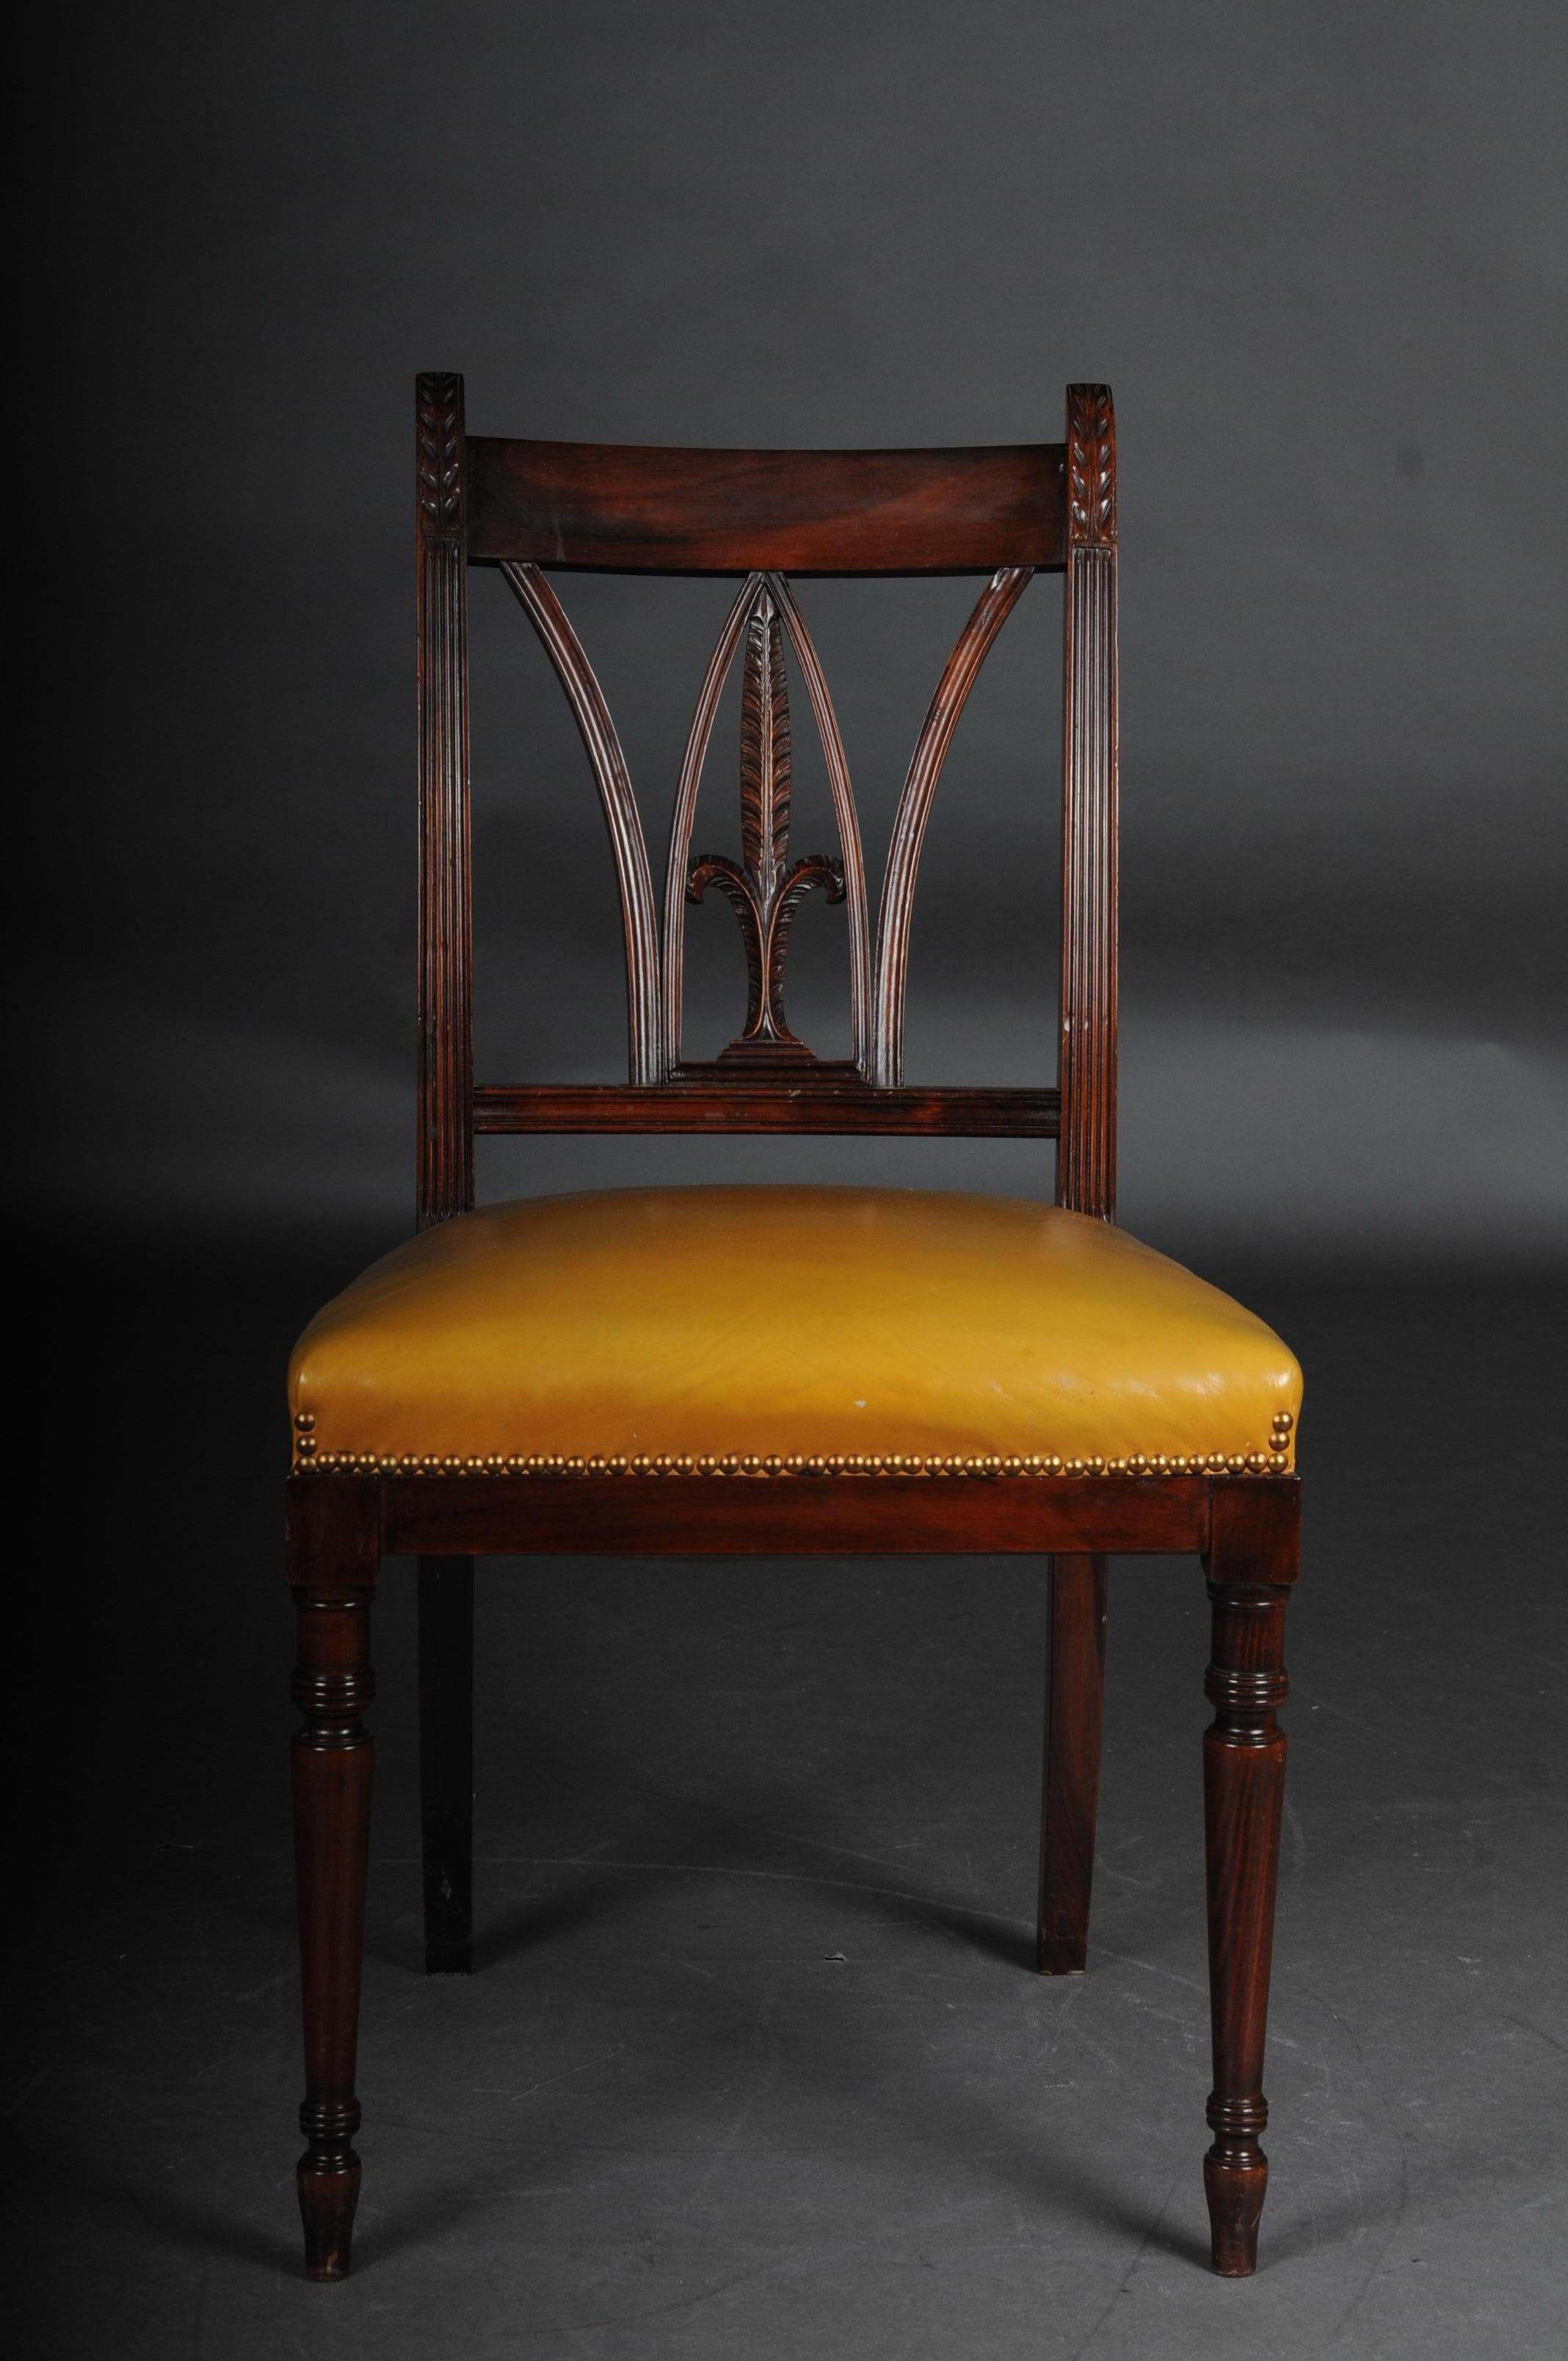 Set of 6 chairs England Victorian 20th century, mahogany, leather.

Solid wood mahogany, England Victorian 20th century fine and timeless lines, a seat of the highest quality. Carved solid wood. Rich carving. Very finely designed frame with relief